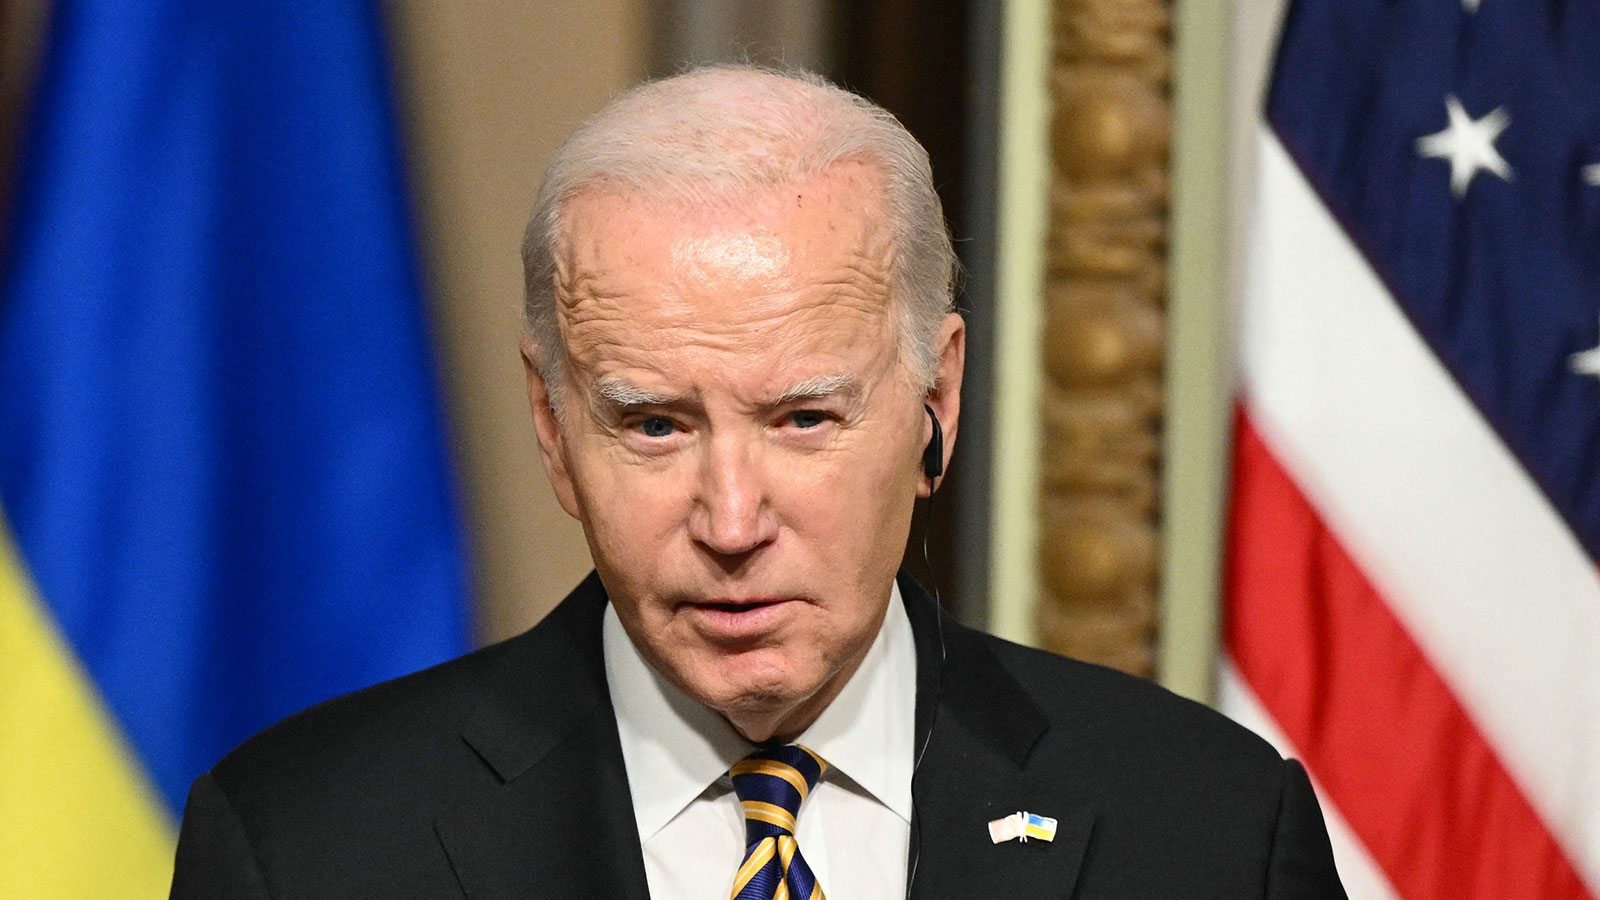 Biden speaks during a joint press conference with Ukraine's President Volodymyr Zelensky in Washington, DC, on Tuesday, December 12.